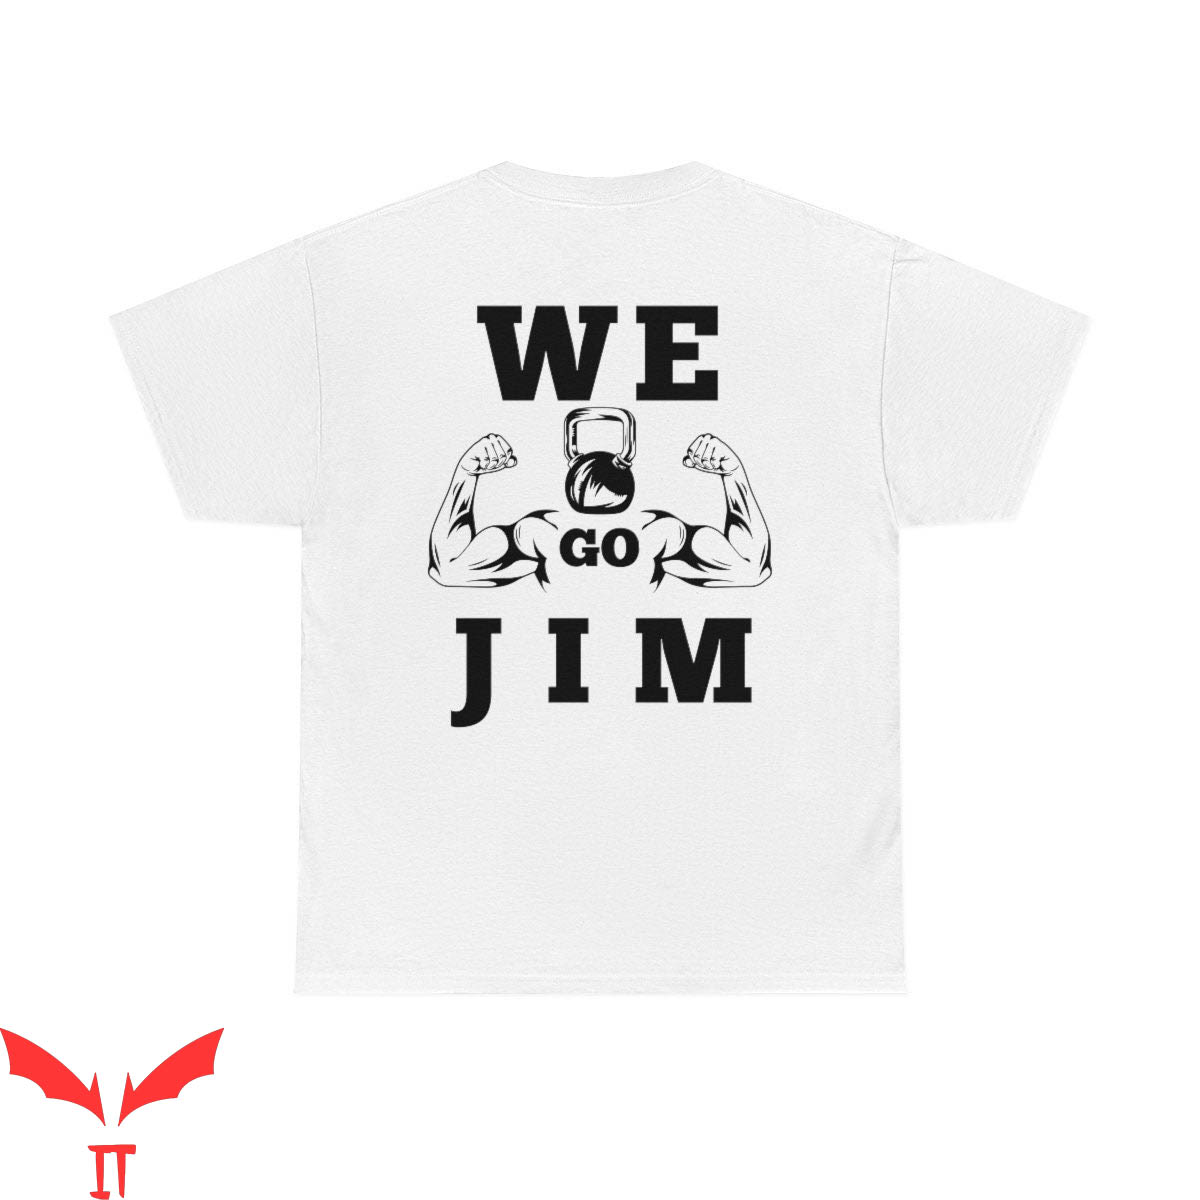 We Go Jim T-Shirt Workout Gym Pump Cover Cool Graphic